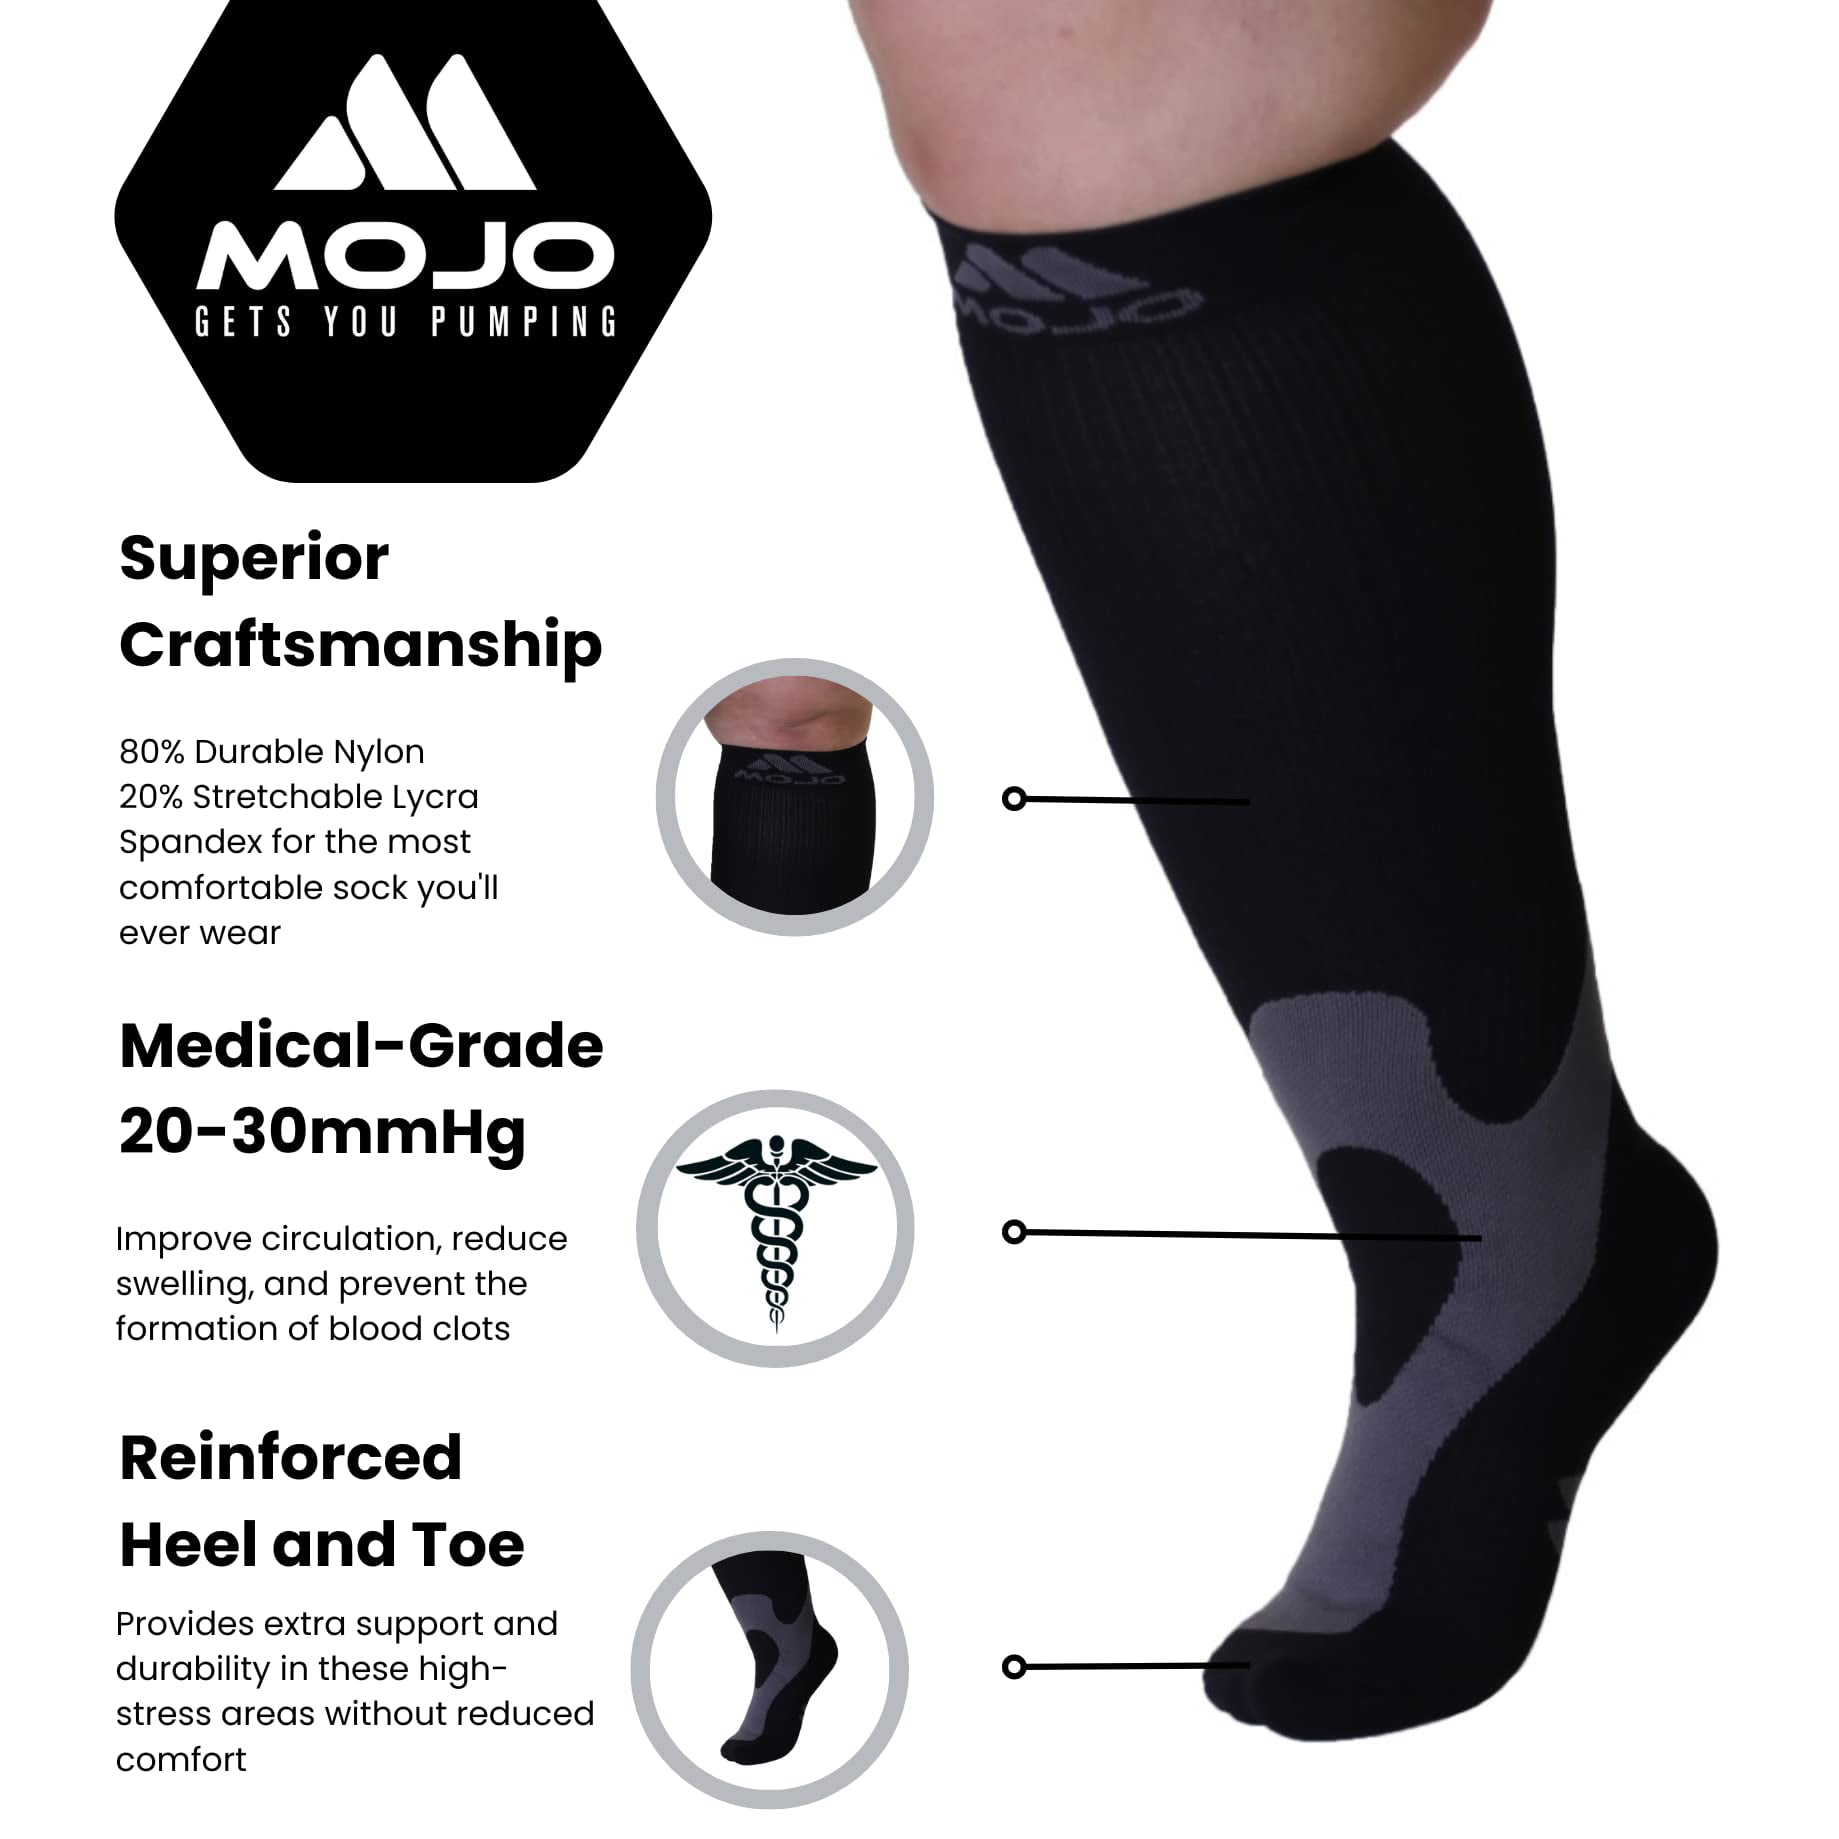 Mojo Compression Socks Mojo Coolmax Compression Socks with Cushioned Terry  Foot and Heel - Firm Graduated Support 20-30mmHg - A601